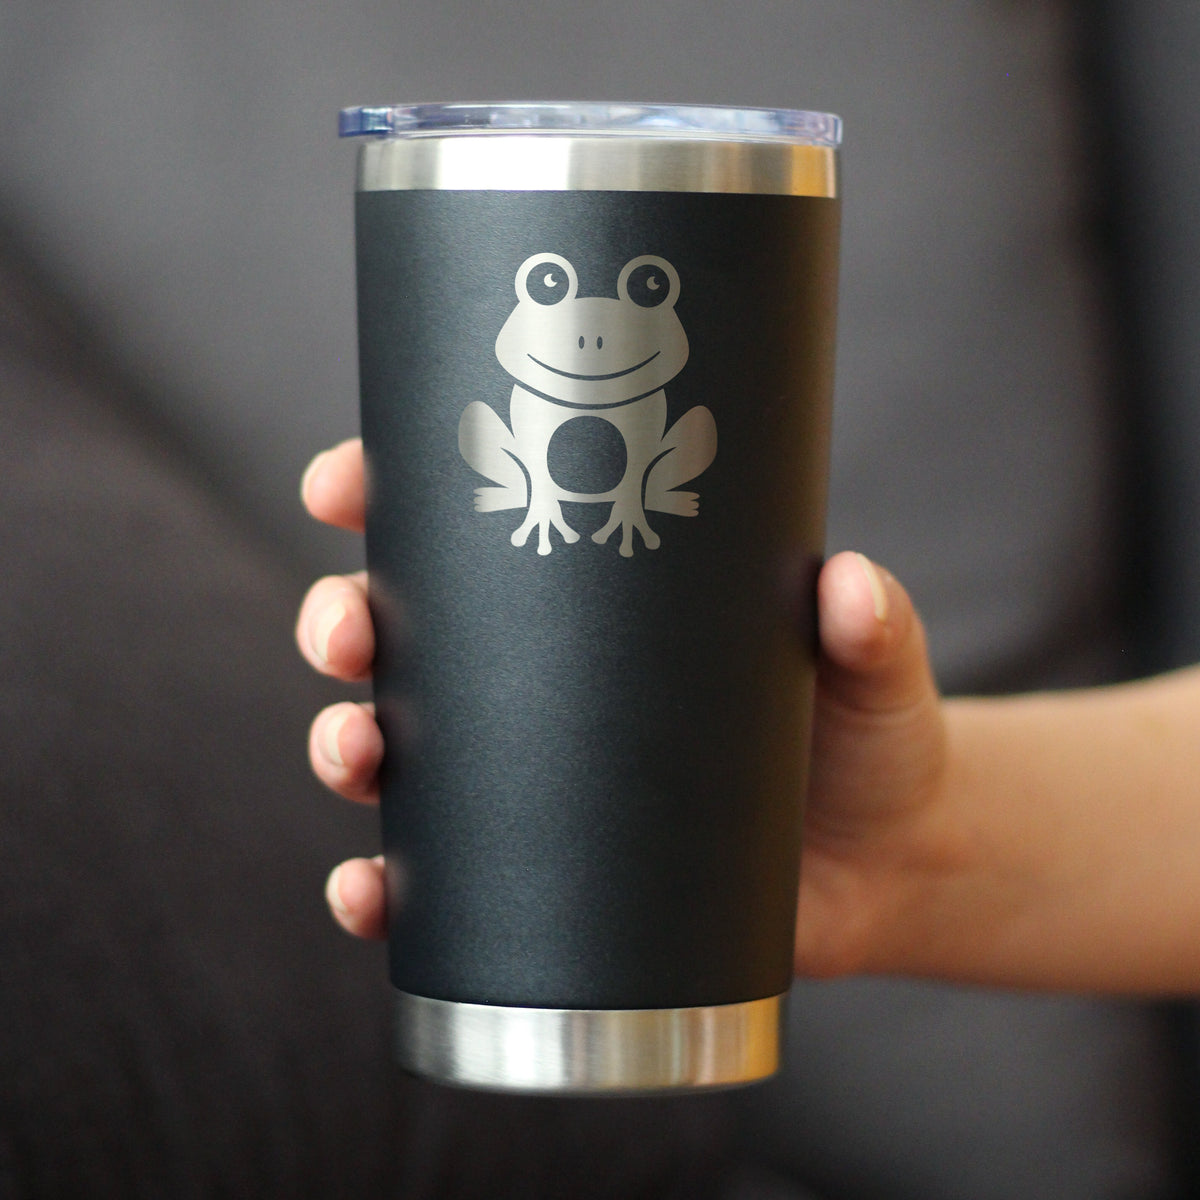 Happy Frog - Insulated Coffee Tumbler Cup with Sliding Lid - Stainless Steel Travel Mug - Unique Frog Gifts for Women and Men